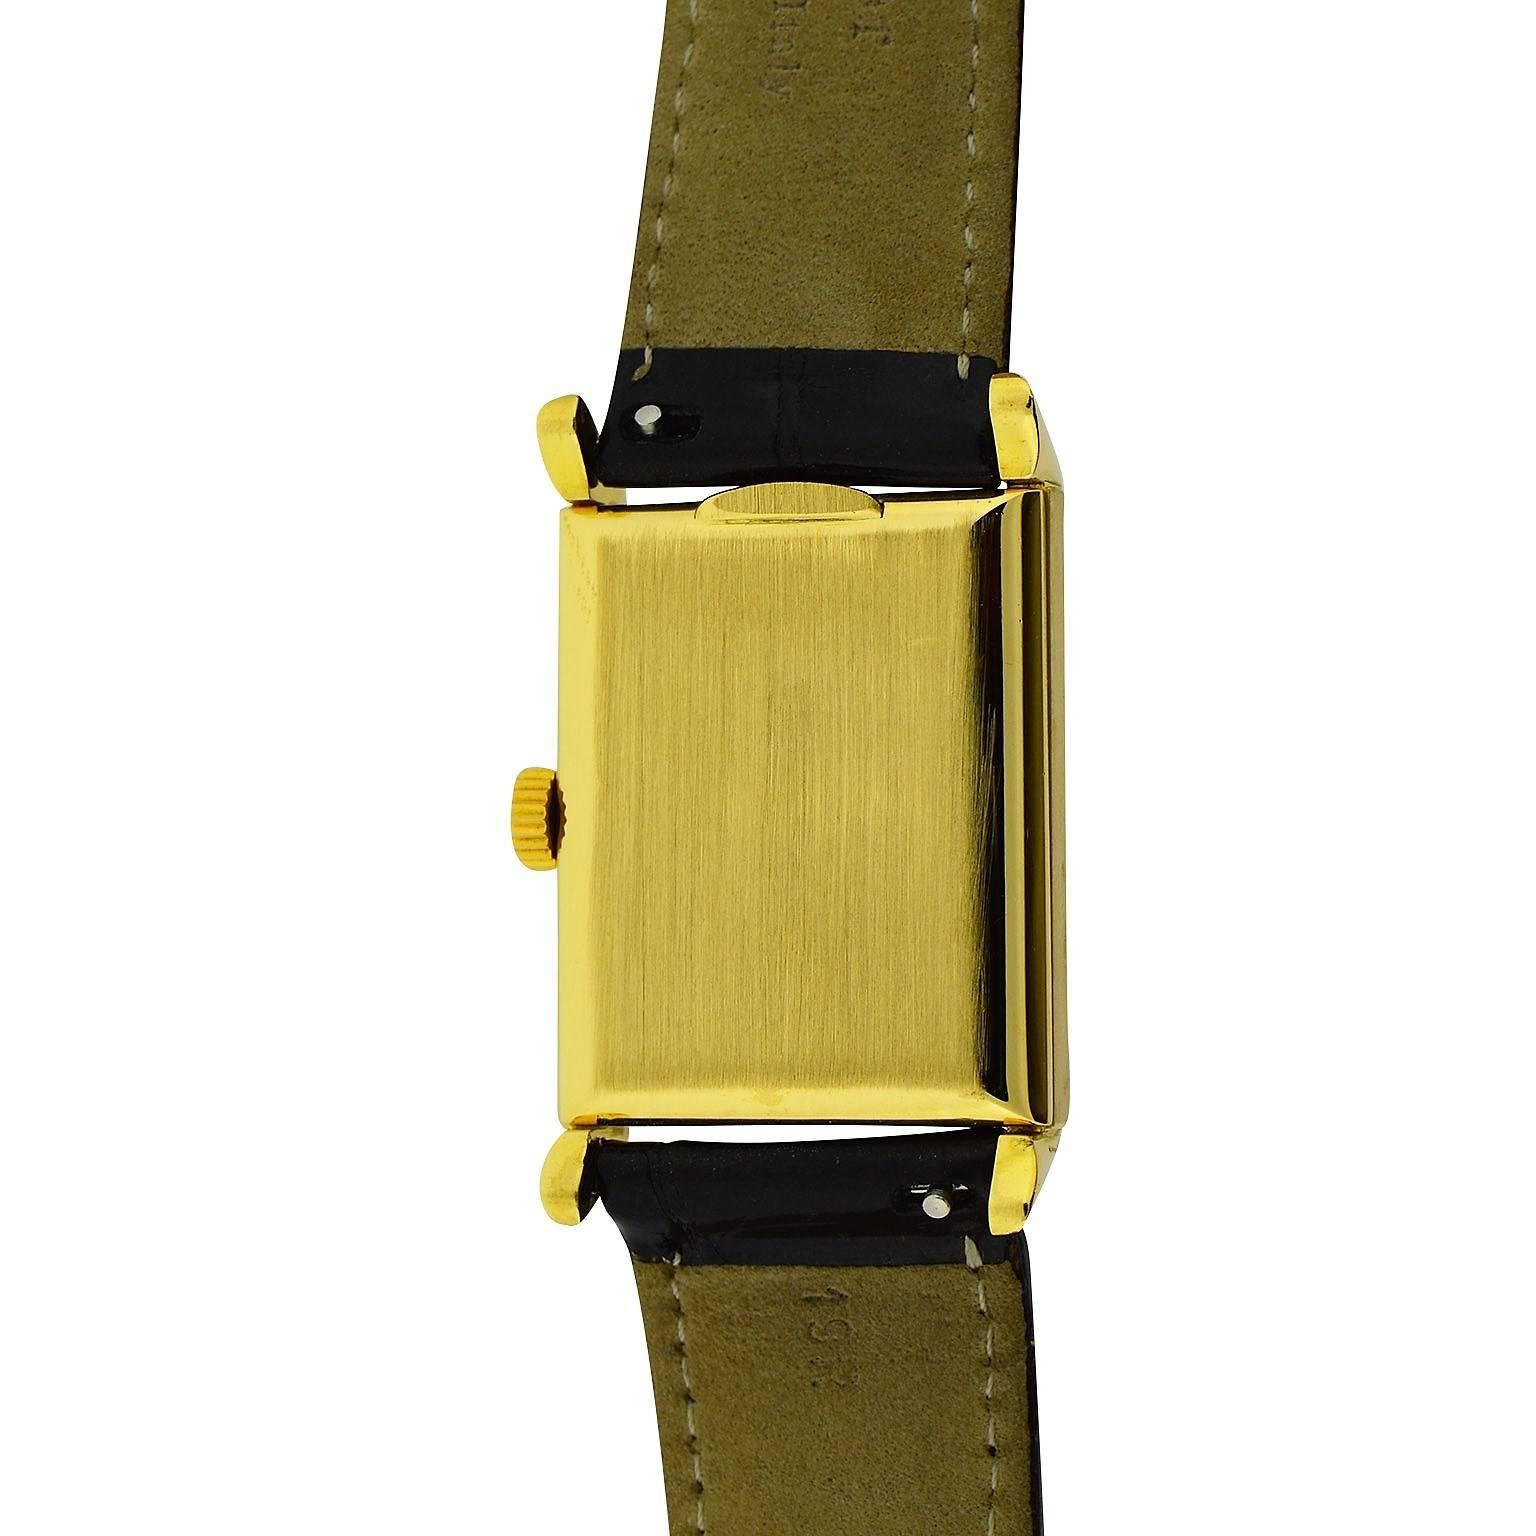 FACTORY / HOUSE: Patek Philippe and Company
STYLE / REFERENCE: Art Deco / Tank Style
METAL / MATERIAL: 18 Kt. Yellow Gold
DIMENSIONS: 38mm X 24mm
CIRCA: 1950
MOVEMENT / CALIBER: Manual Winding / 18 Jewels / Cal. 9-90
DIAL / HANDS: Silvered with Kiln